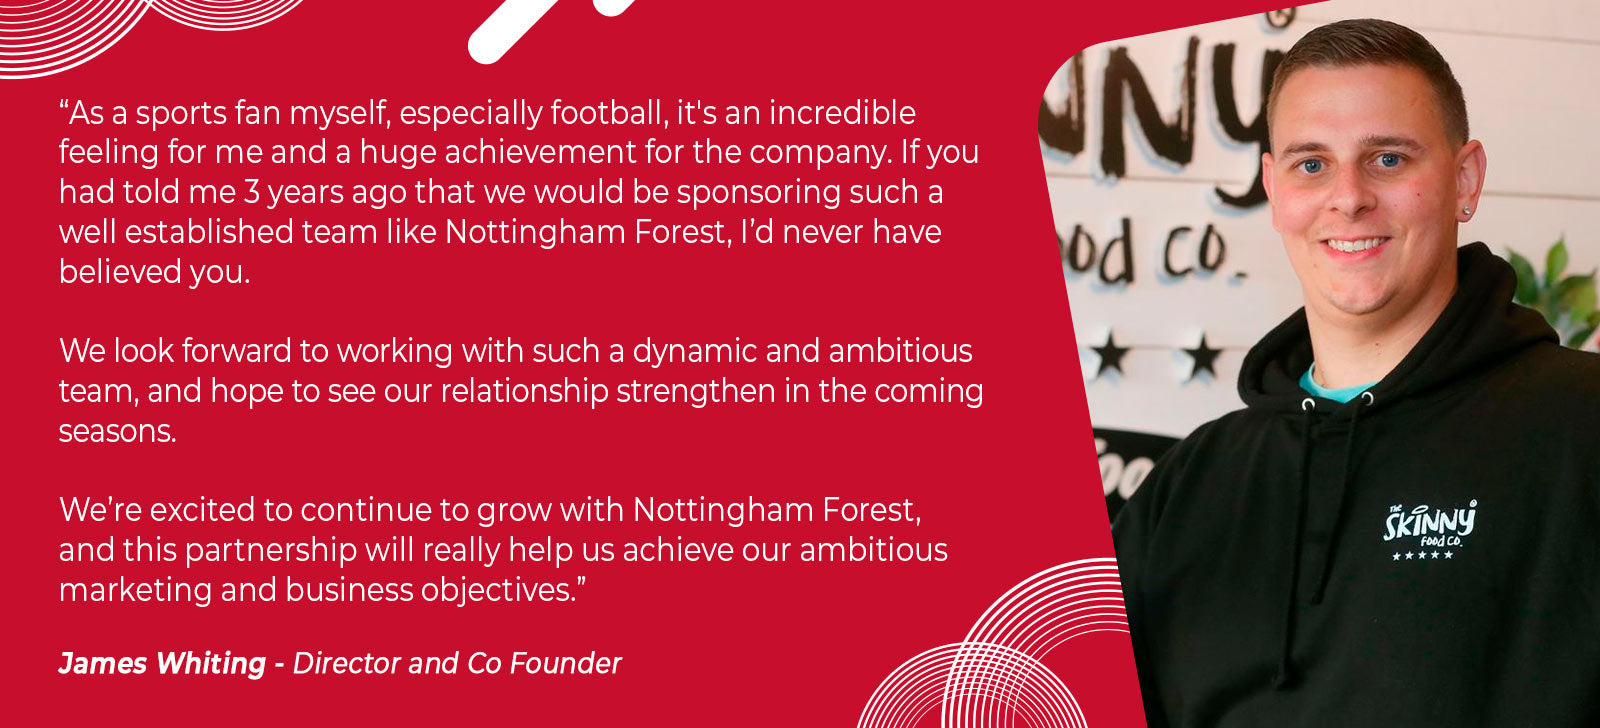 James Whiting Sponsorship with Nottingham Forest Football Club